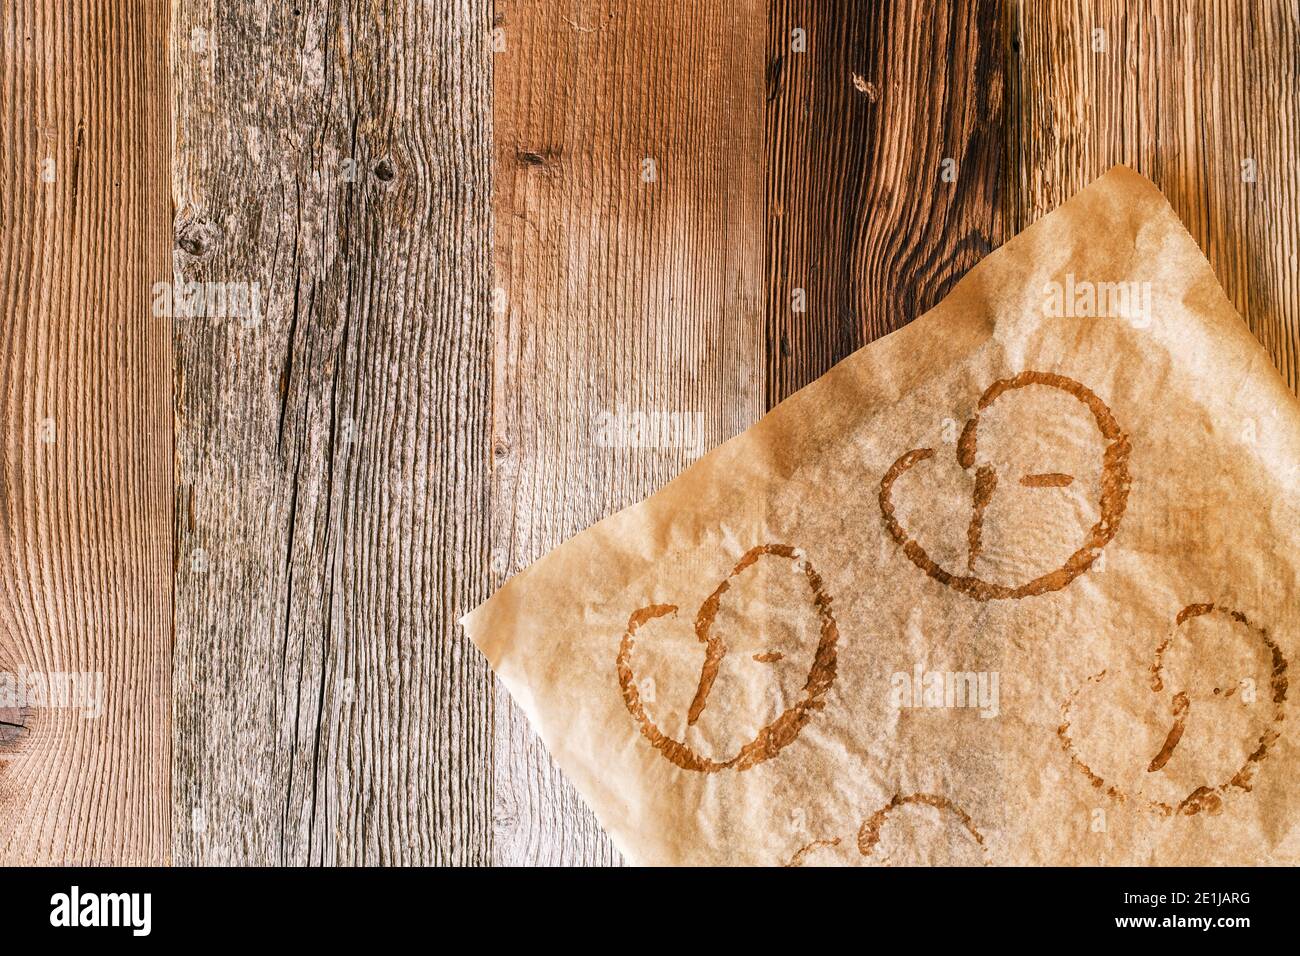 Used baking paper with imprints of baked pretzels on a rustic wooden background. Pretzels are typical German food in Bavaria and at the Oktoberfest. Stock Photo